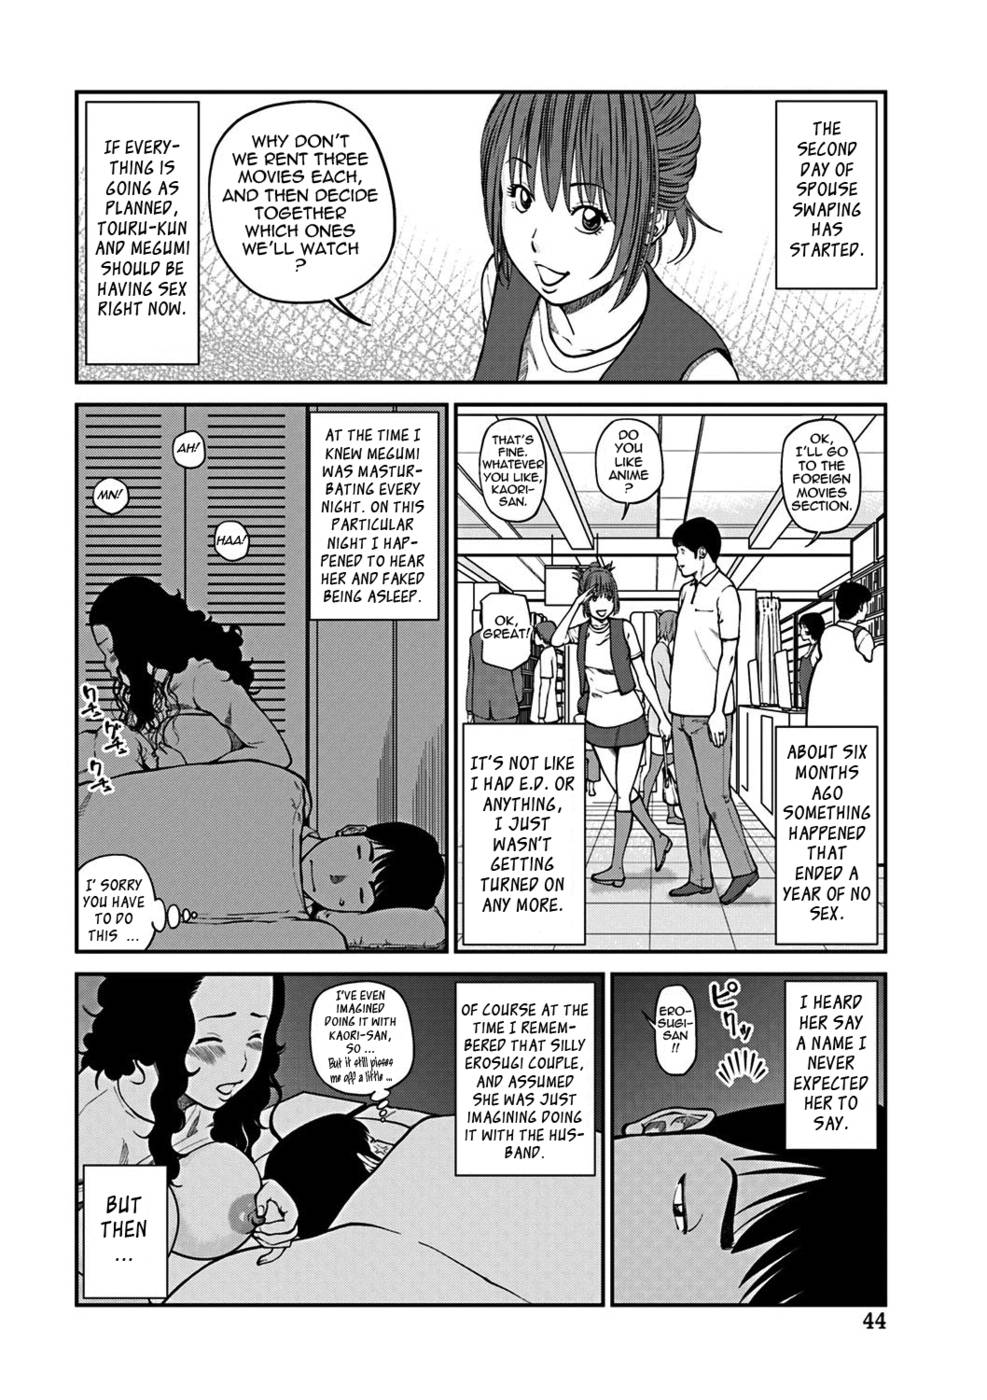 33 Year Old Unsatisfied Wife-Chapter 3-Spouse Swapping-Second Day-Hentai Manga Hentai Comic photo